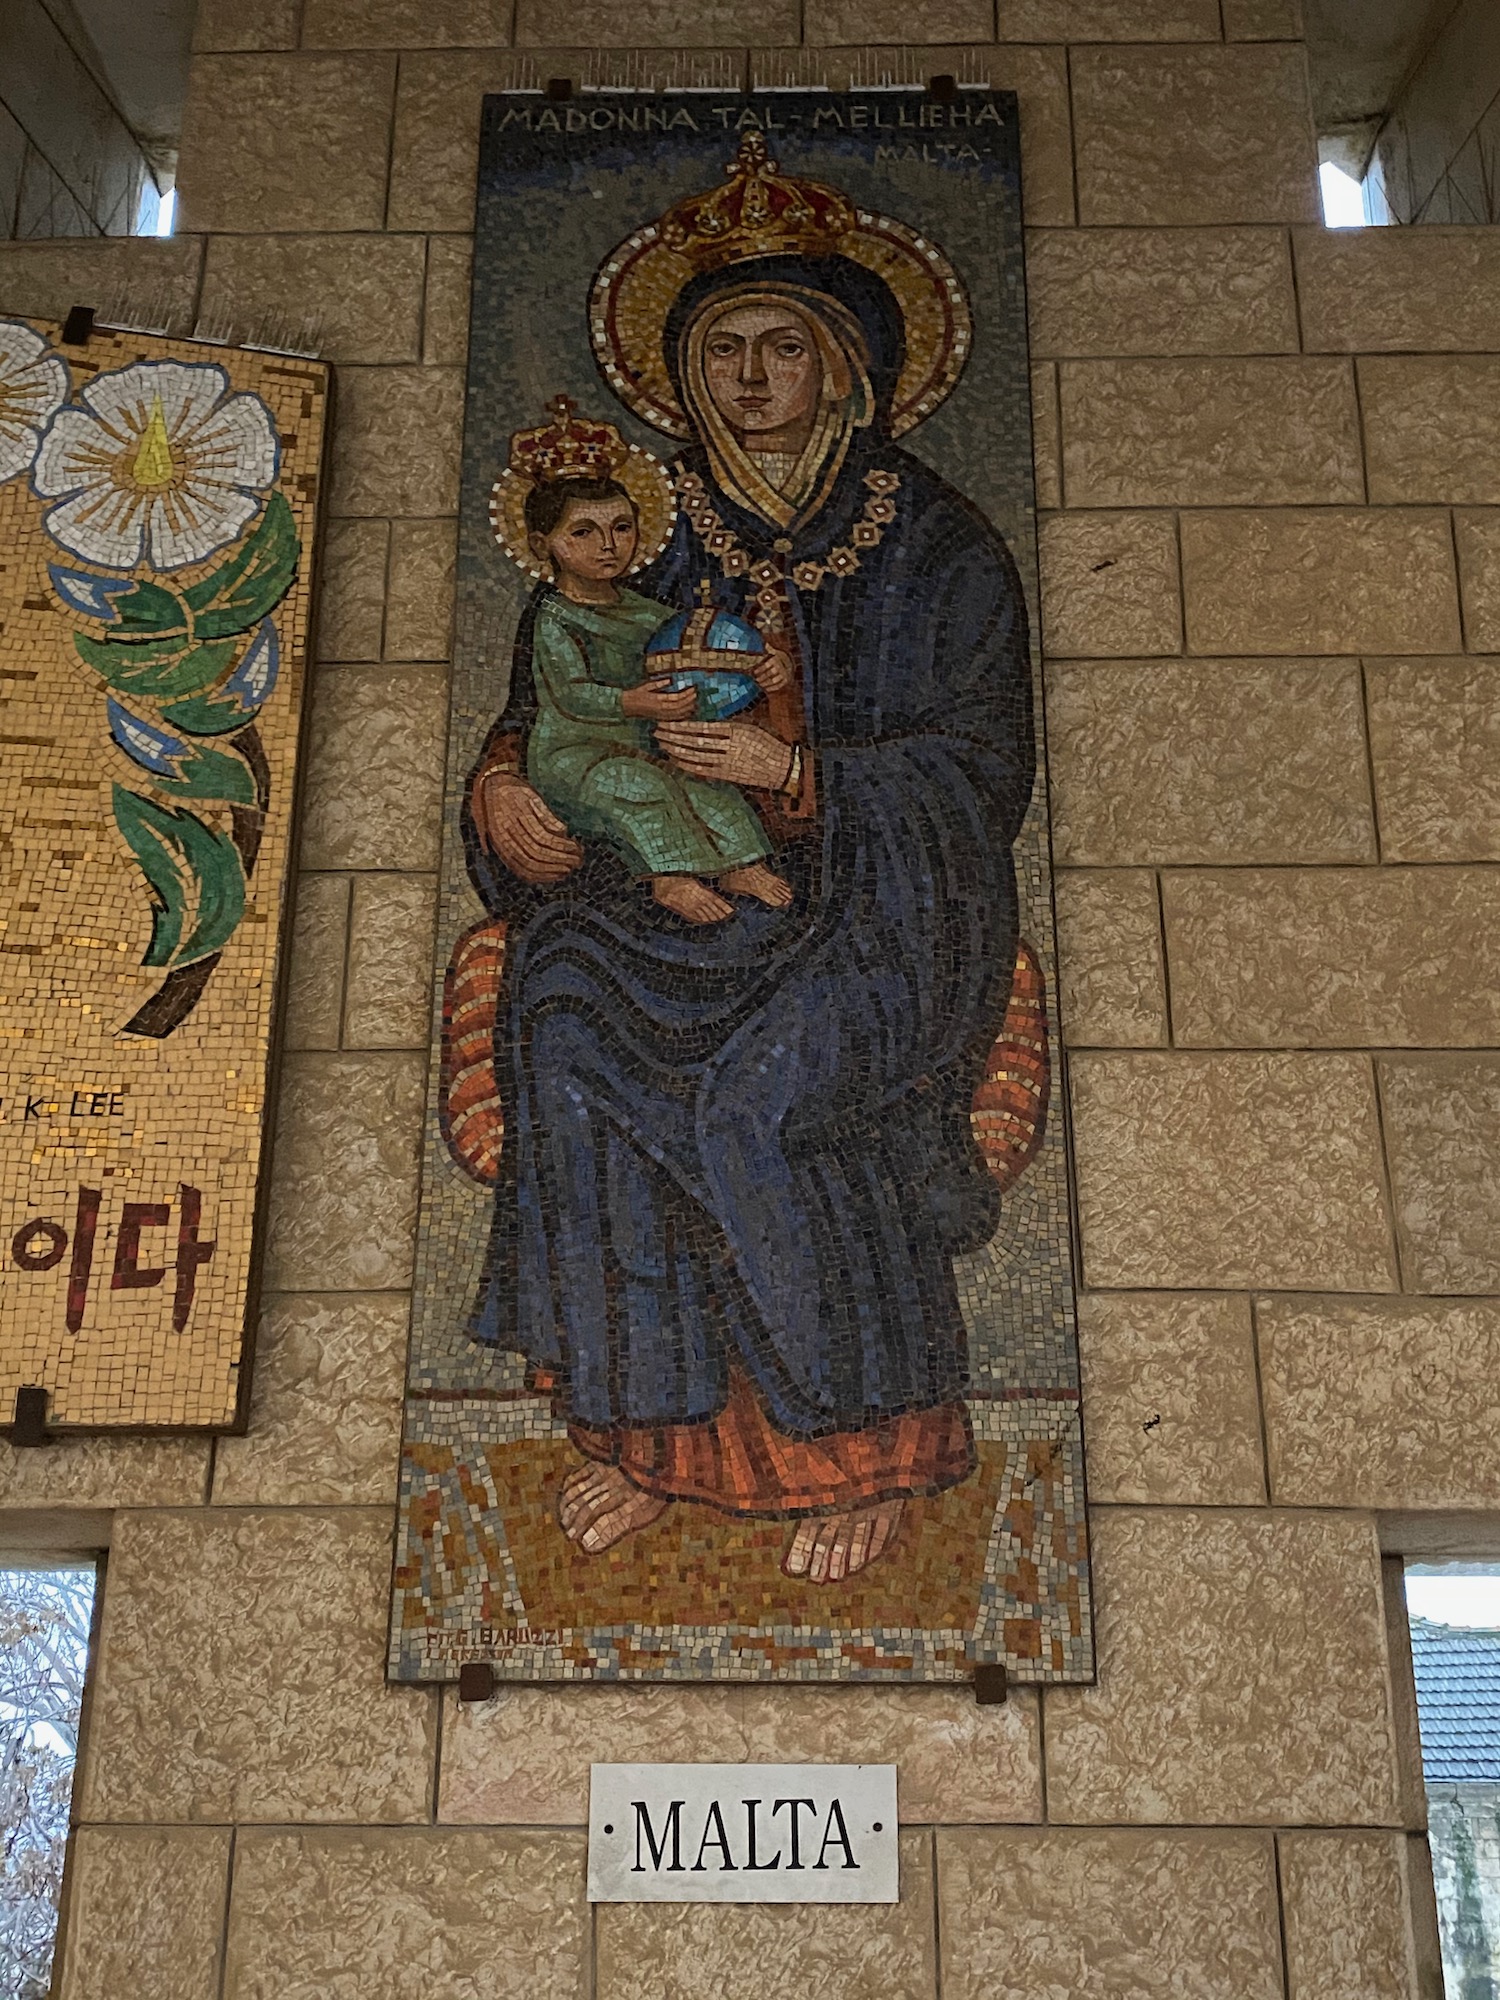 a mosaic of a woman holding a child